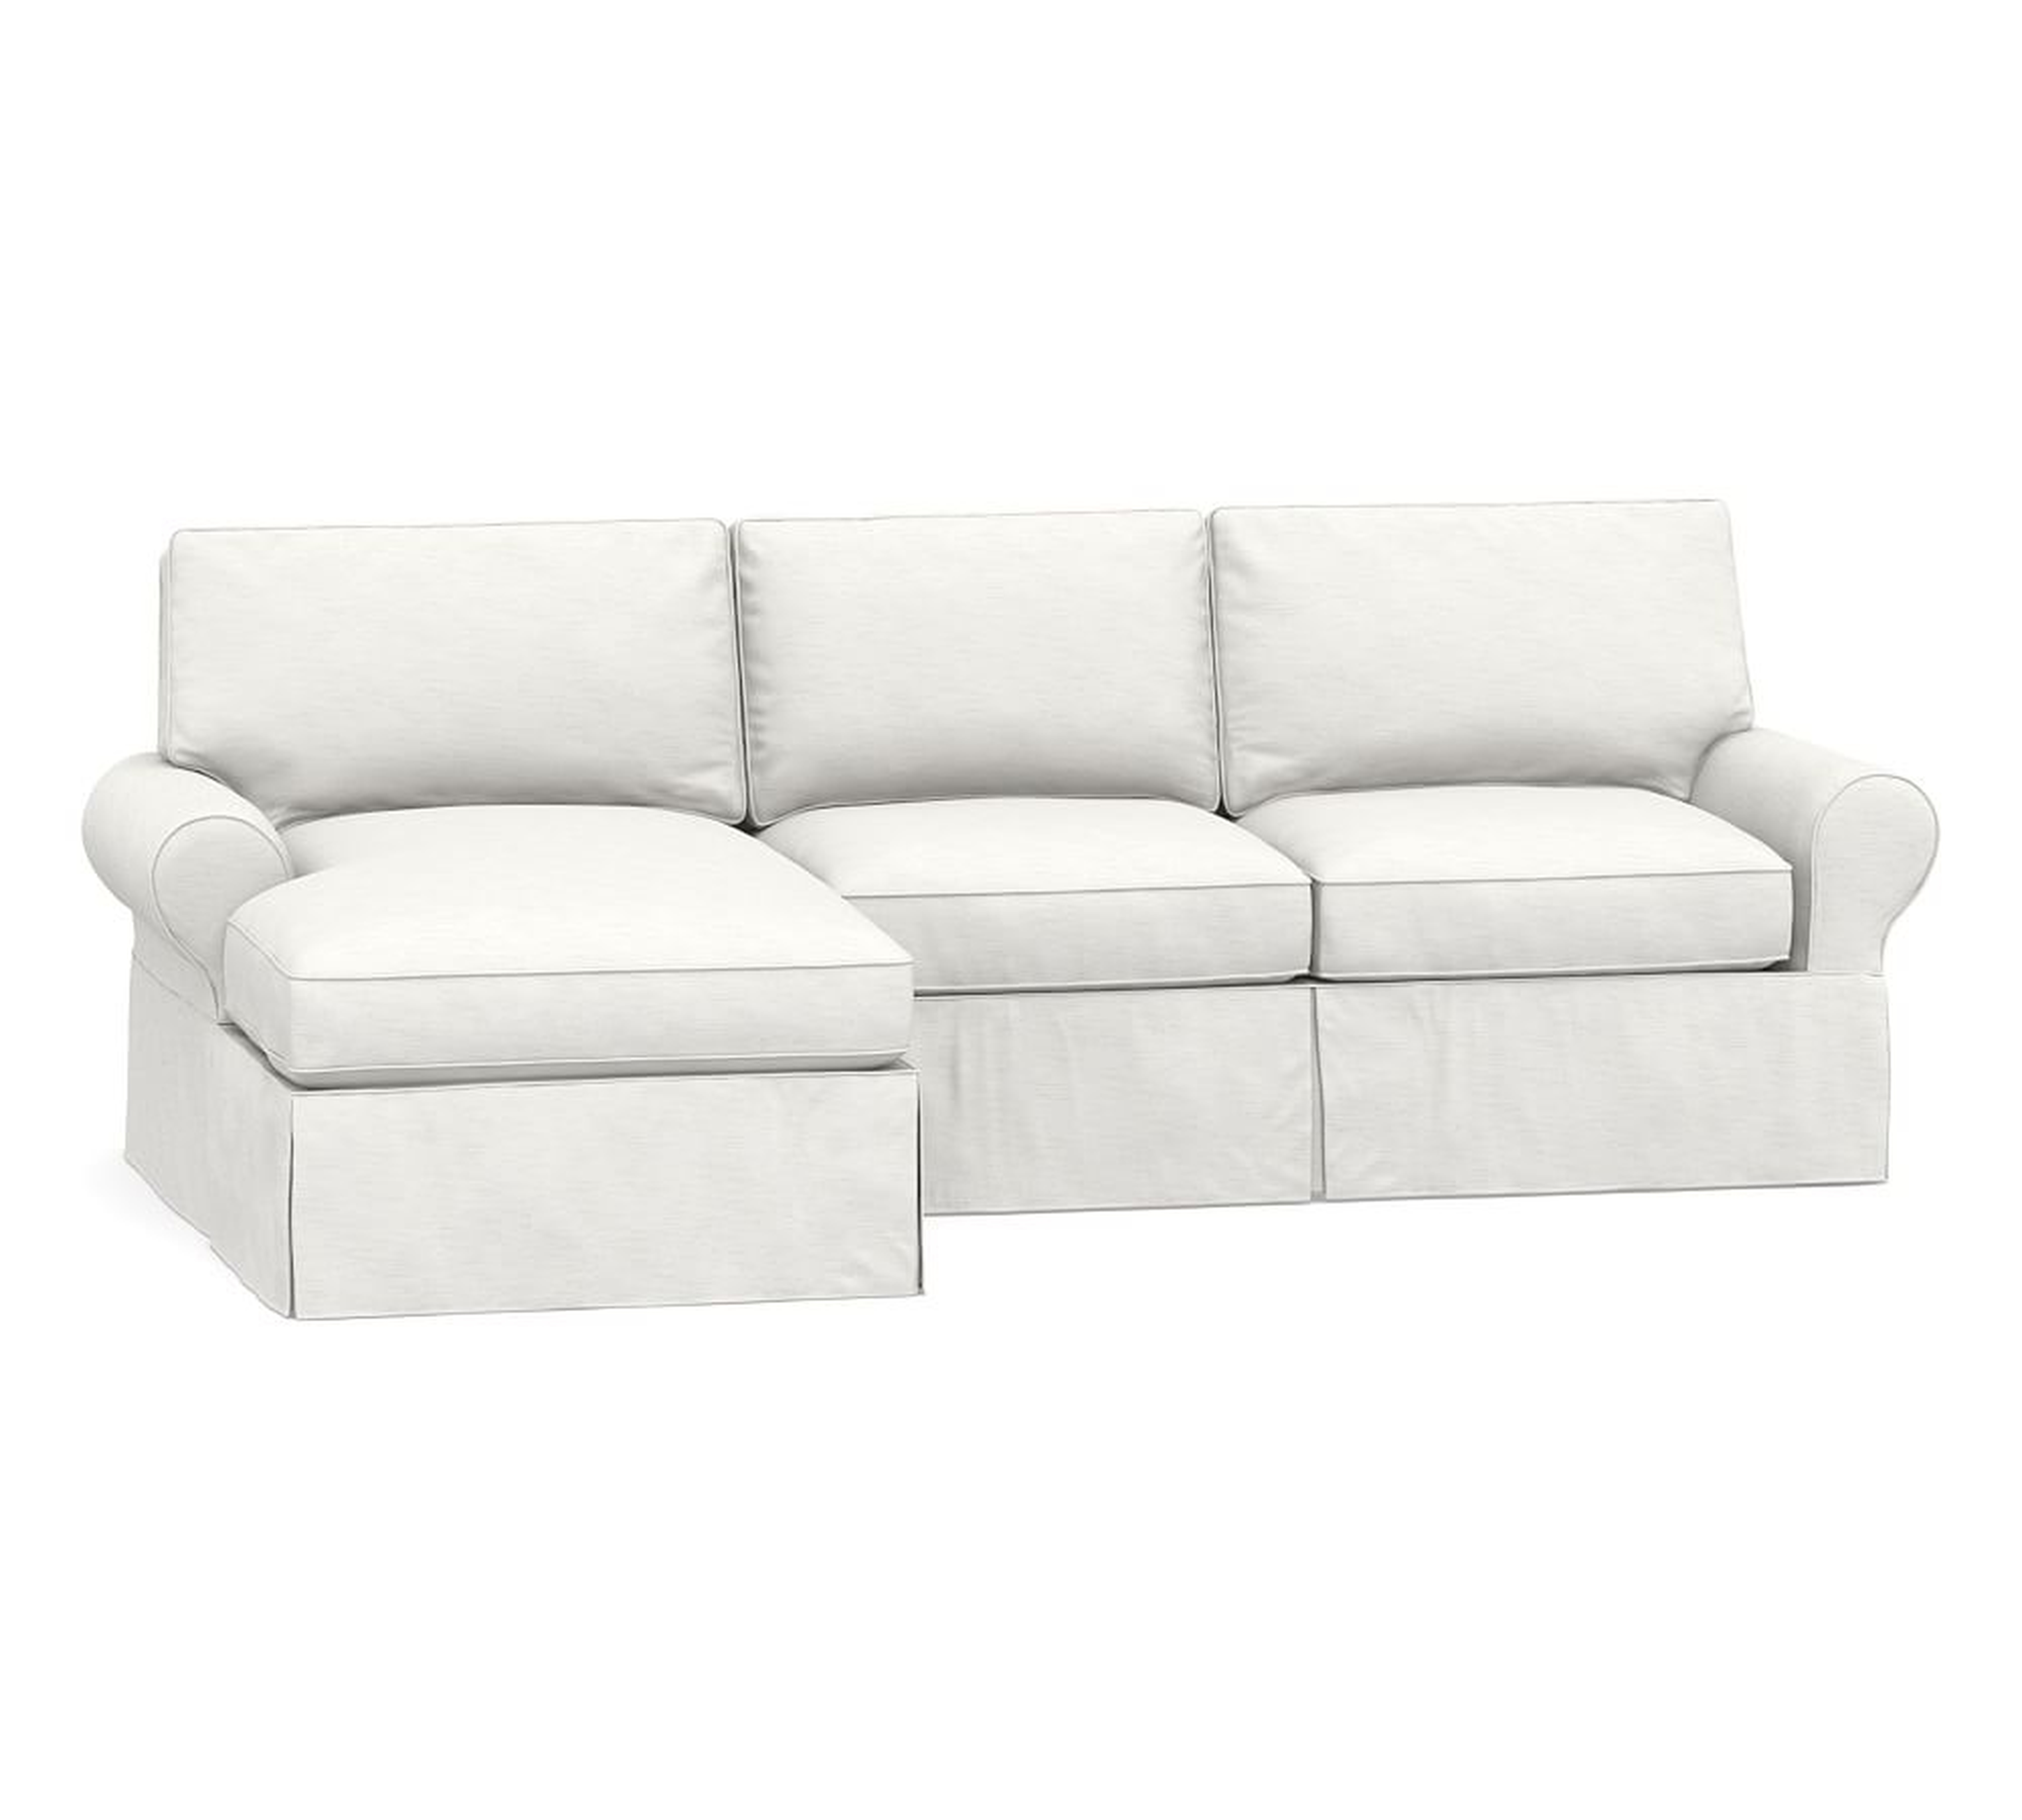 PB Basic Slipcovered Right Arm Sofa with Chaise Sectional, Polyester Wrapped Cushions, Performance Slub Cotton White - Pottery Barn